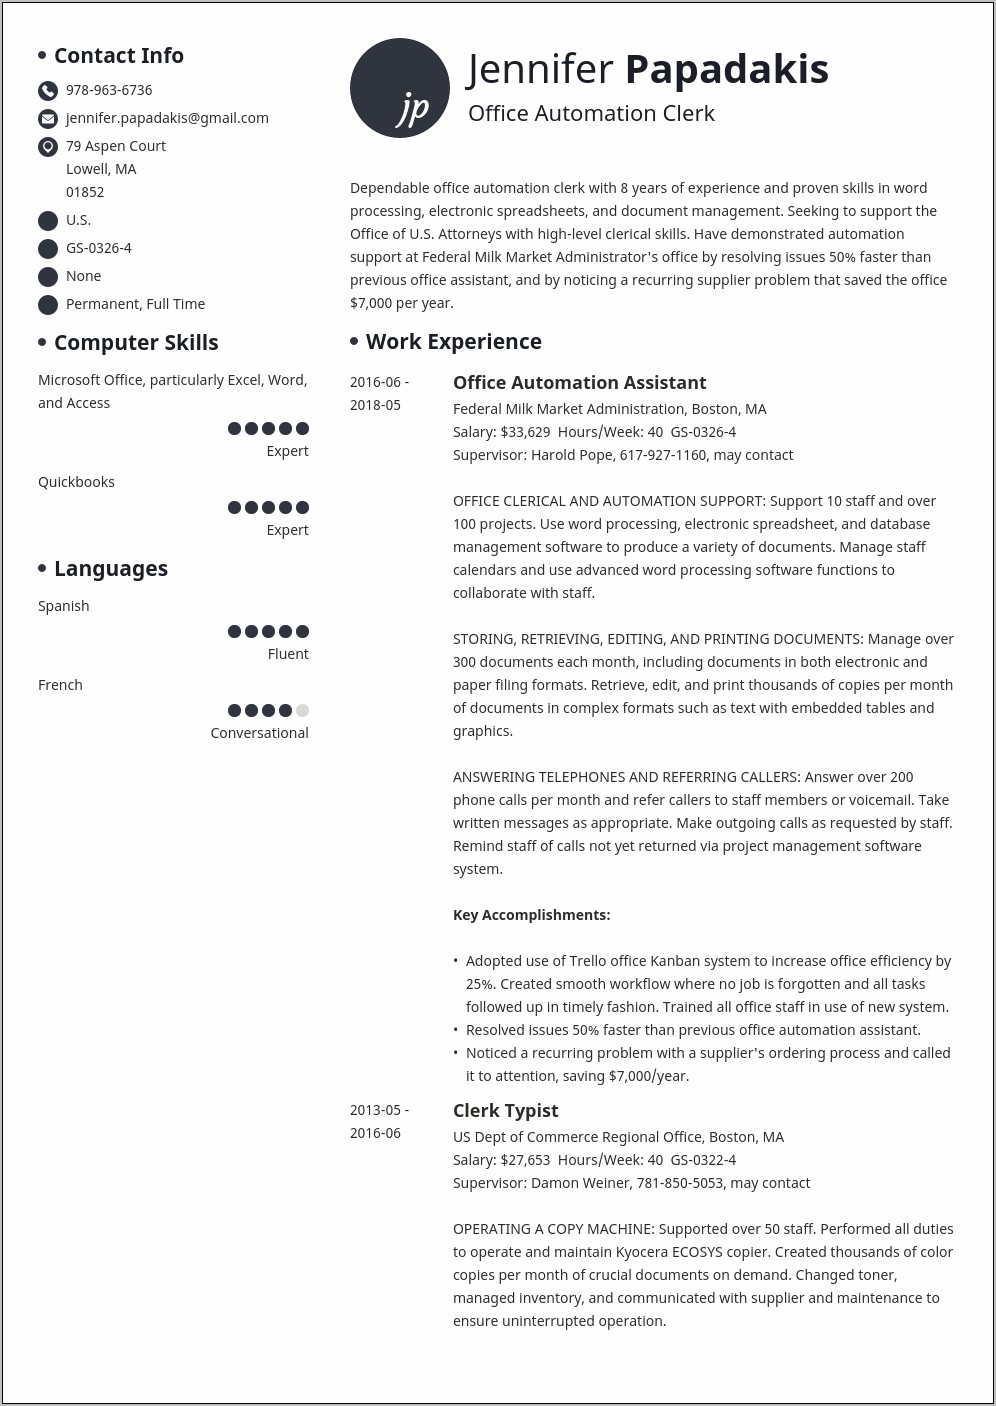 Microsoft Word Resume Template Govenmentjobs.com